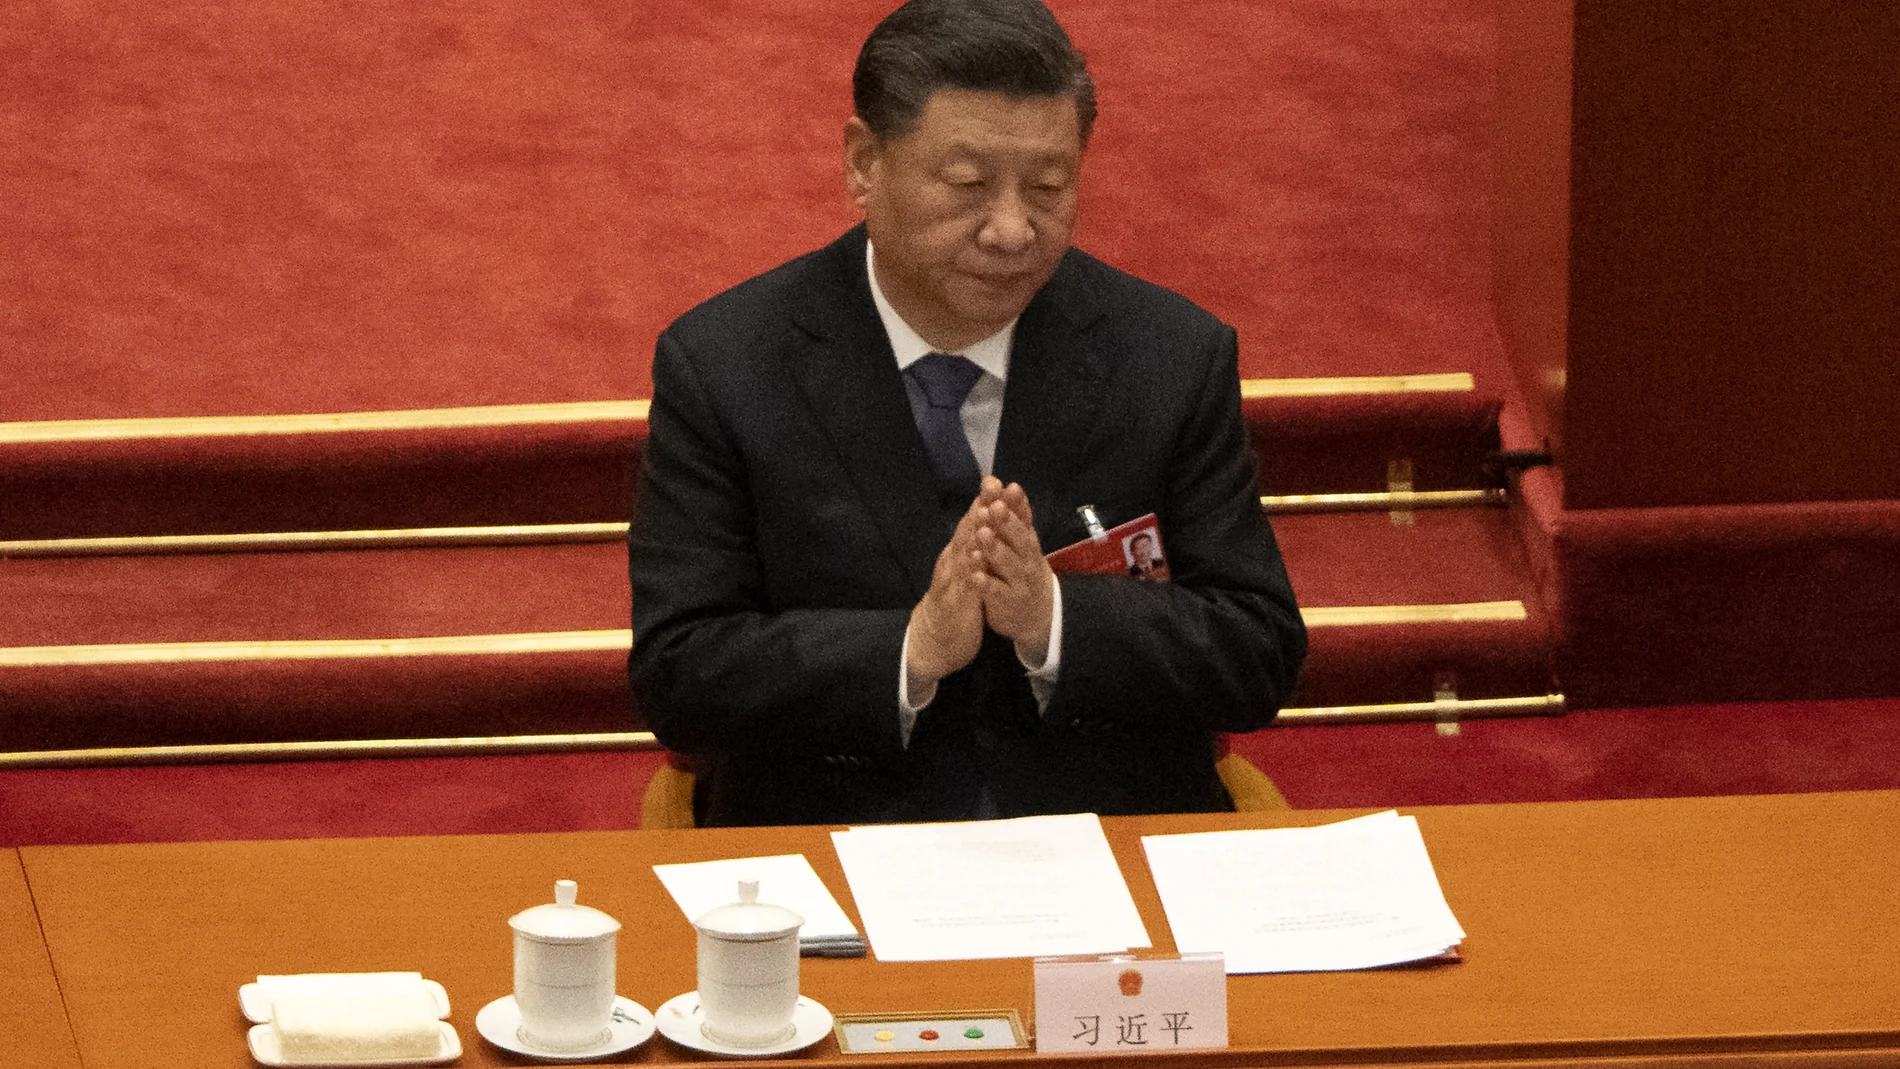 Chinese President Xi Jinping applauds during the closing session of China's National People's Congress (NPC) at the Great Hall of the People in Beijing, Friday, March 11, 2022. (AP Photo/Sam McNeil)